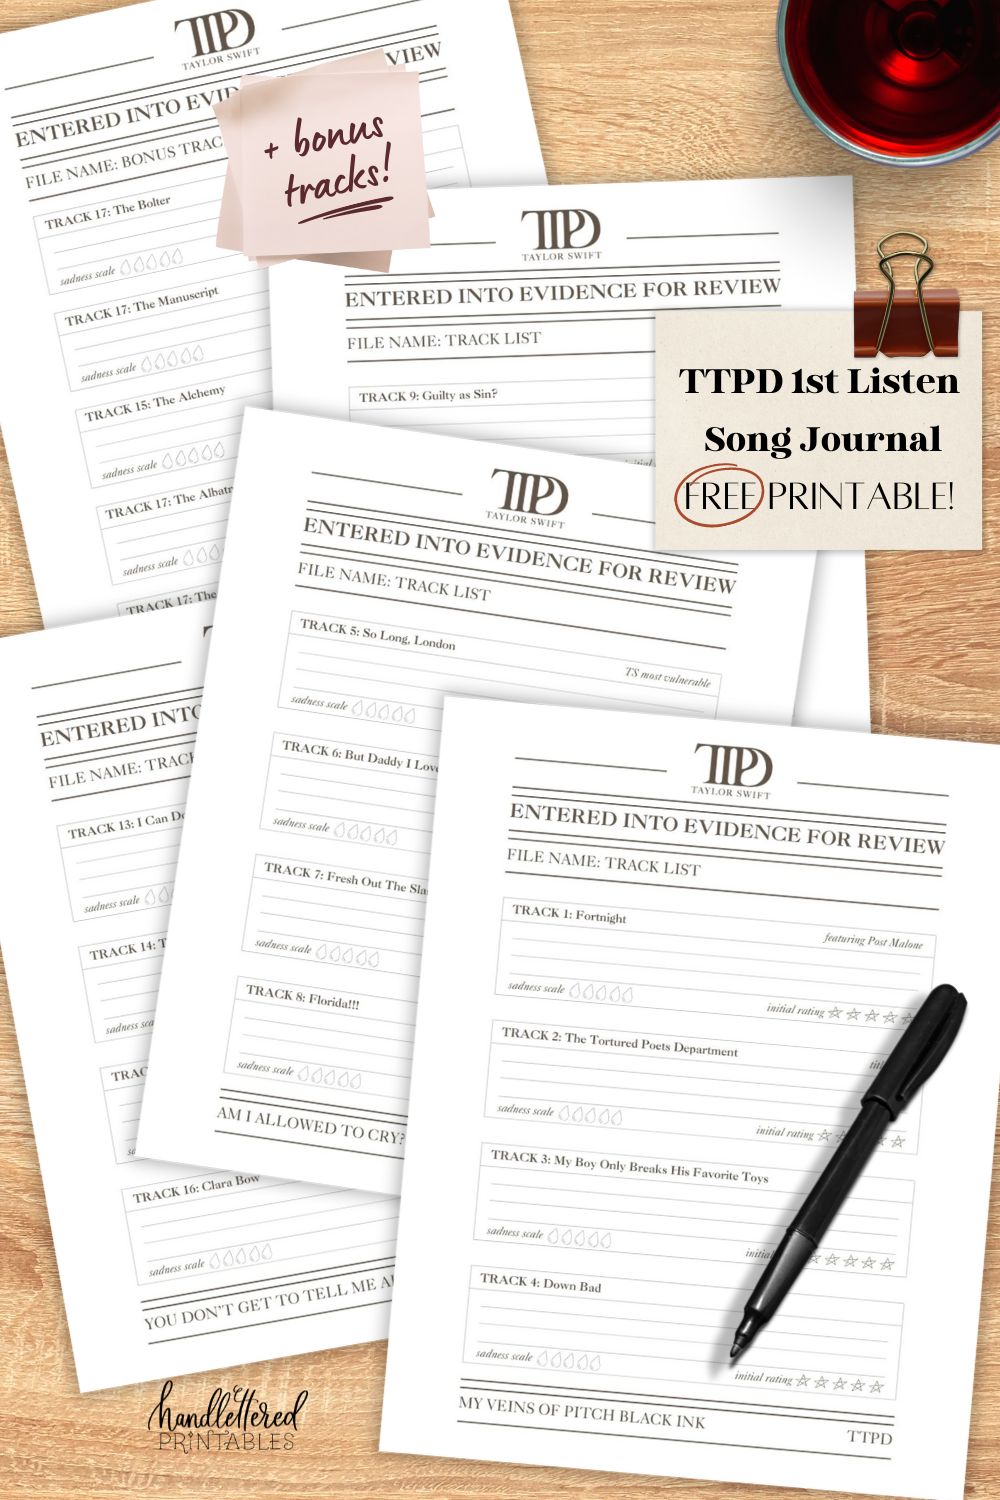 image of printed papers on light wood table with a glass of red wine, charcuterie board and pen. Post it notes read: TTPD 1st Listen song journal free printable + bonus tracks